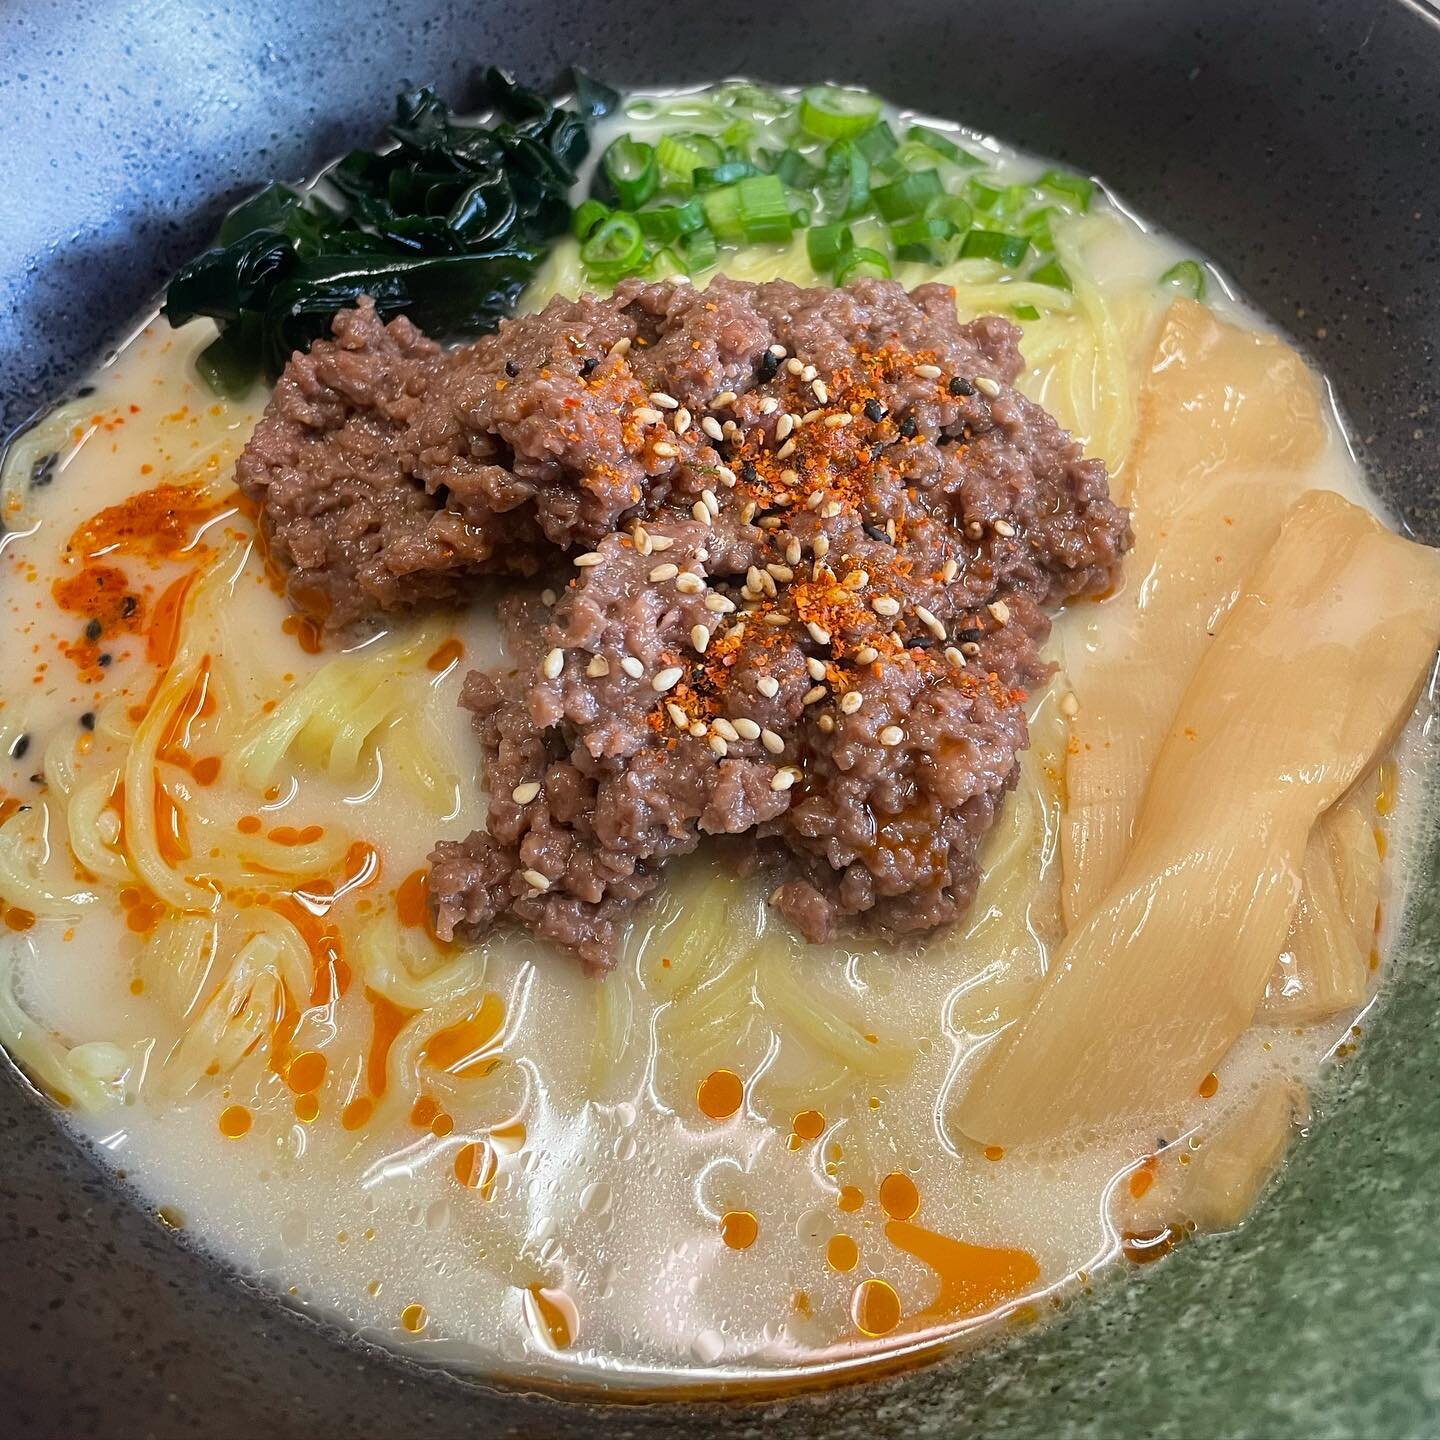 Vegan Tonkotsu Ramen w/ Impossible meat! 🌱this menu is still not on the menu yet, we will put on the new menu in the summer but if you want to try please let your server know and we can make one for you 🙏 #vegan #veganramen #veganfood #plantbased #